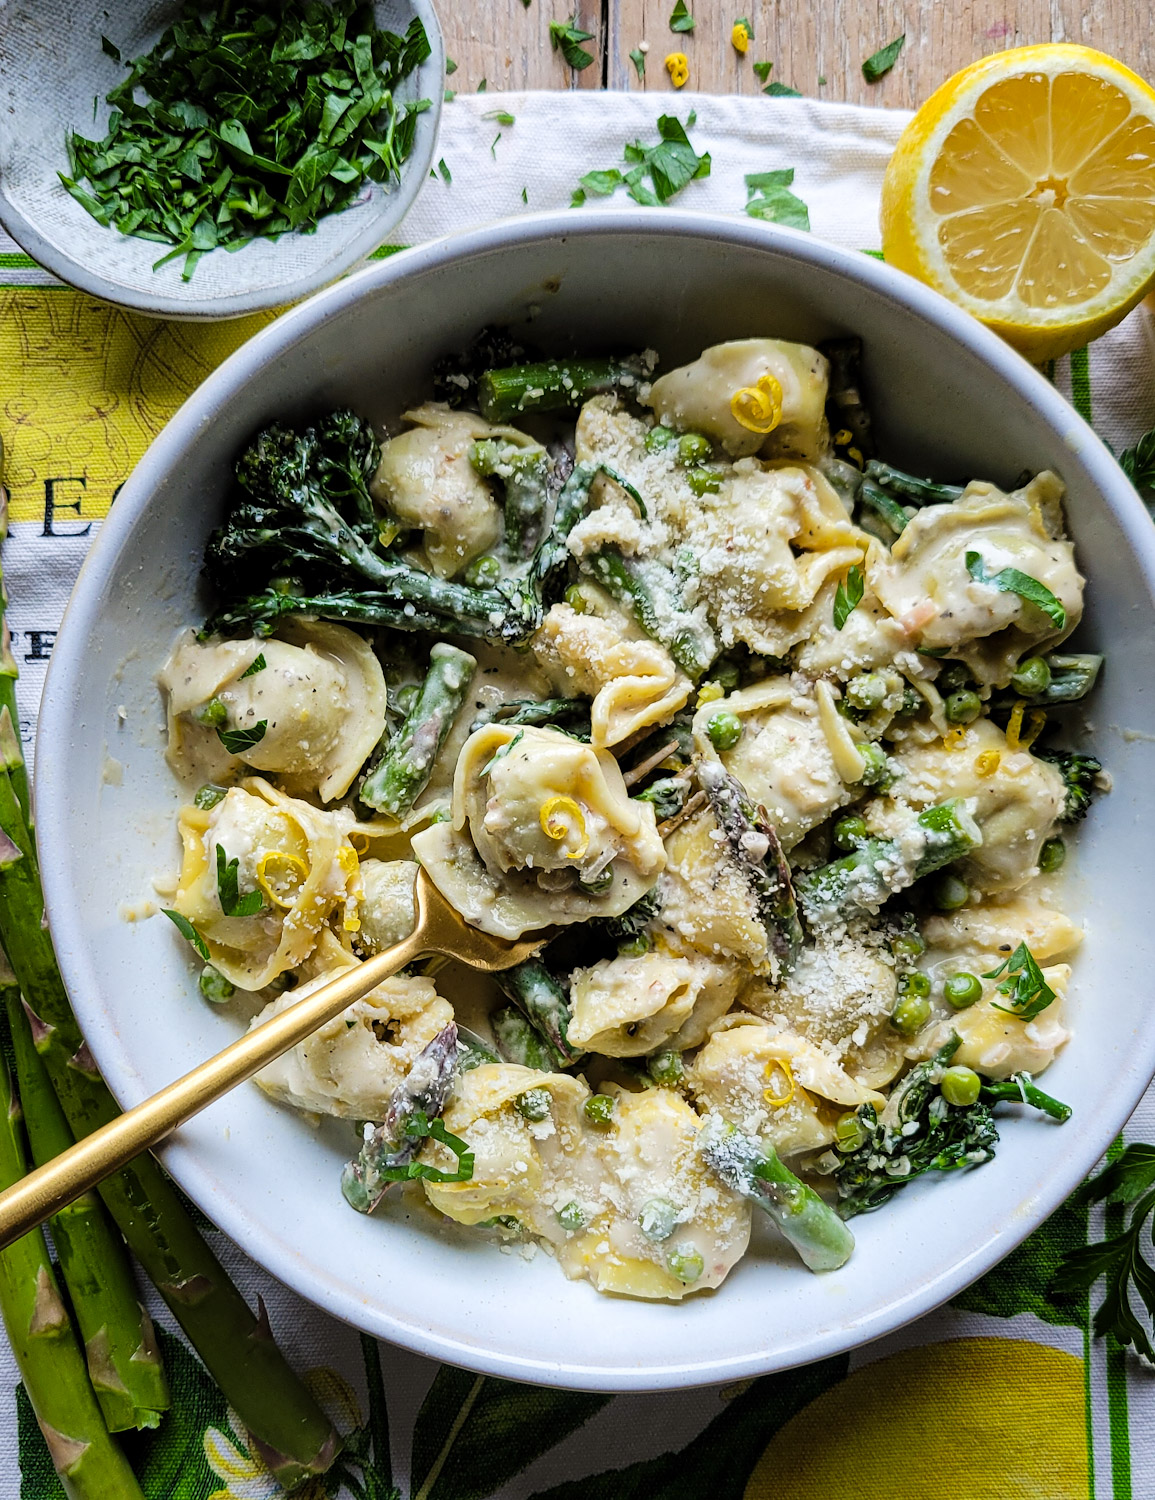 A bowl of Lemon Cream Pasta with Spring Vegetables with a fork holding some pasta is on the table, with fresh asparagus and parsley in the background.